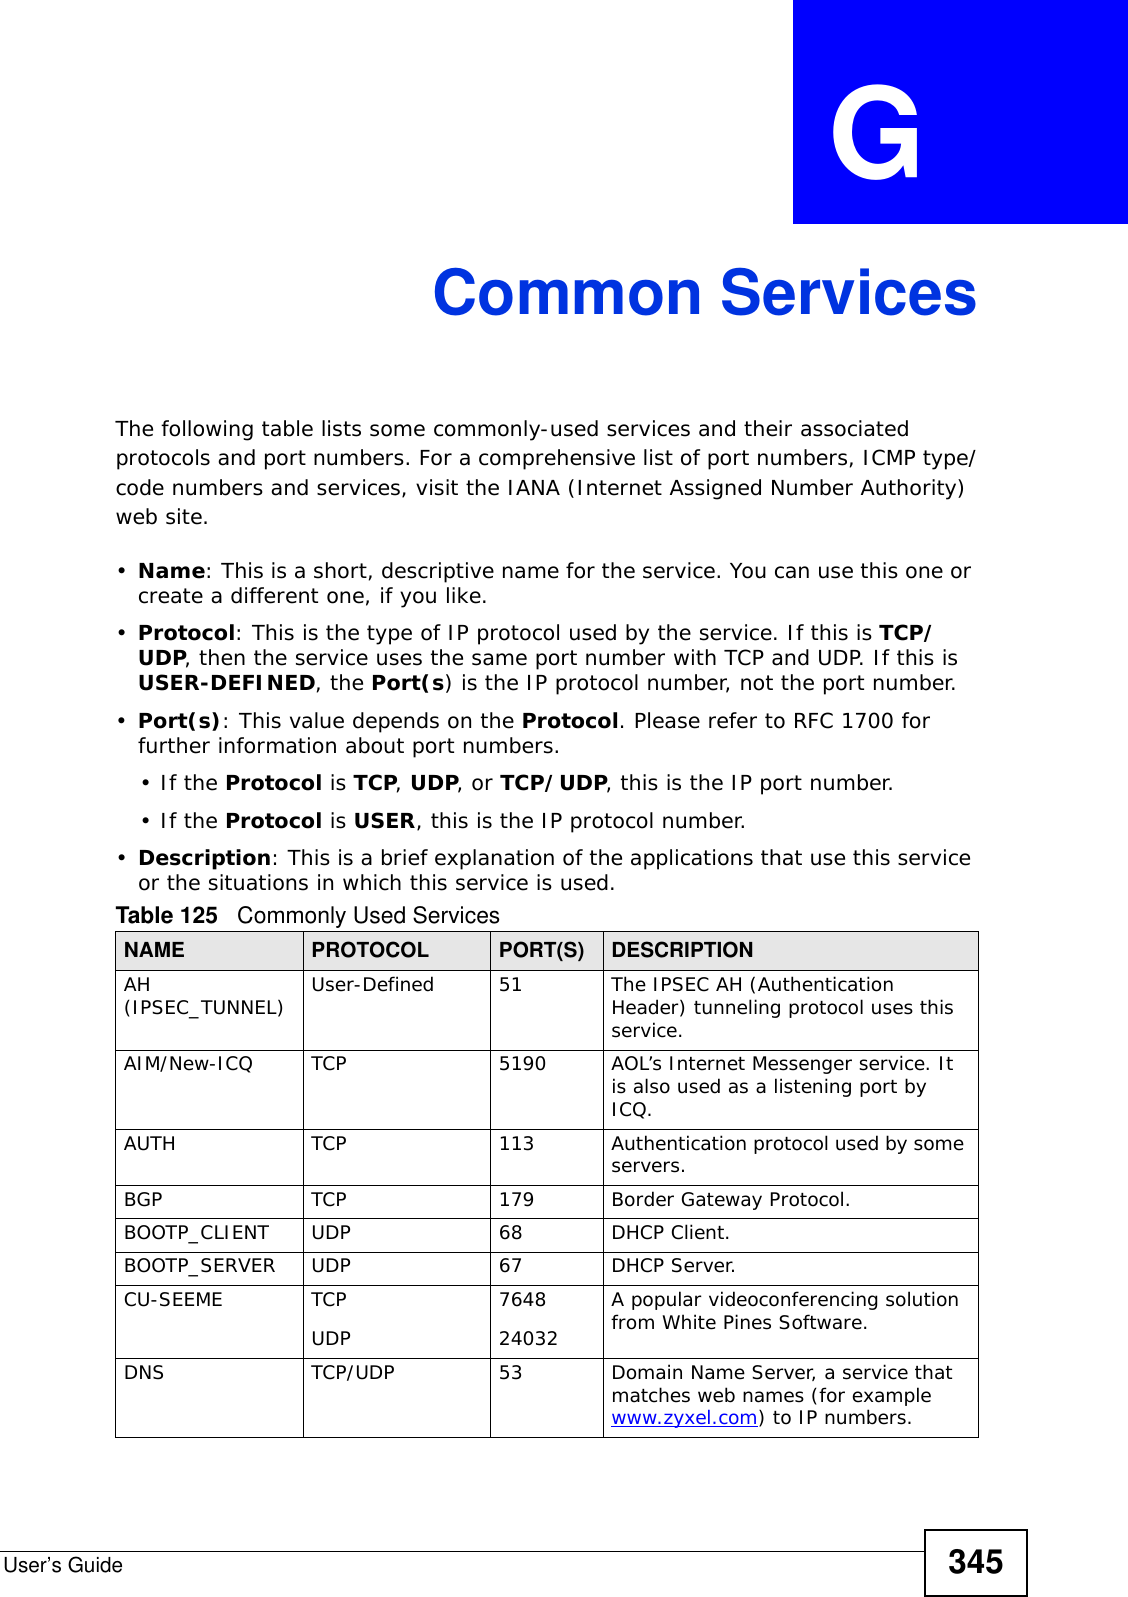 User’s Guide 345APPENDIX  G Common ServicesThe following table lists some commonly-used services and their associated protocols and port numbers. For a comprehensive list of port numbers, ICMP type/code numbers and services, visit the IANA (Internet Assigned Number Authority) web site. •Name: This is a short, descriptive name for the service. You can use this one or create a different one, if you like.•Protocol: This is the type of IP protocol used by the service. If this is TCP/UDP, then the service uses the same port number with TCP and UDP. If this is USER-DEFINED, the Port(s) is the IP protocol number, not the port number.•Port(s): This value depends on the Protocol. Please refer to RFC 1700 for further information about port numbers.•If the Protocol is TCP, UDP, or TCP/UDP, this is the IP port number.•If the Protocol is USER, this is the IP protocol number.•Description: This is a brief explanation of the applications that use this service or the situations in which this service is used.Table 125   Commonly Used ServicesNAME PROTOCOL PORT(S) DESCRIPTIONAH (IPSEC_TUNNEL) User-Defined 51 The IPSEC AH (Authentication Header) tunneling protocol uses this service.AIM/New-ICQ TCP 5190 AOL’s Internet Messenger service. It is also used as a listening port by ICQ.AUTH TCP 113 Authentication protocol used by some servers.BGP TCP 179 Border Gateway Protocol.BOOTP_CLIENT UDP 68 DHCP Client.BOOTP_SERVER UDP 67 DHCP Server.CU-SEEME TCPUDP764824032A popular videoconferencing solution from White Pines Software.DNS TCP/UDP 53 Domain Name Server, a service that matches web names (for example www.zyxel.com) to IP numbers.